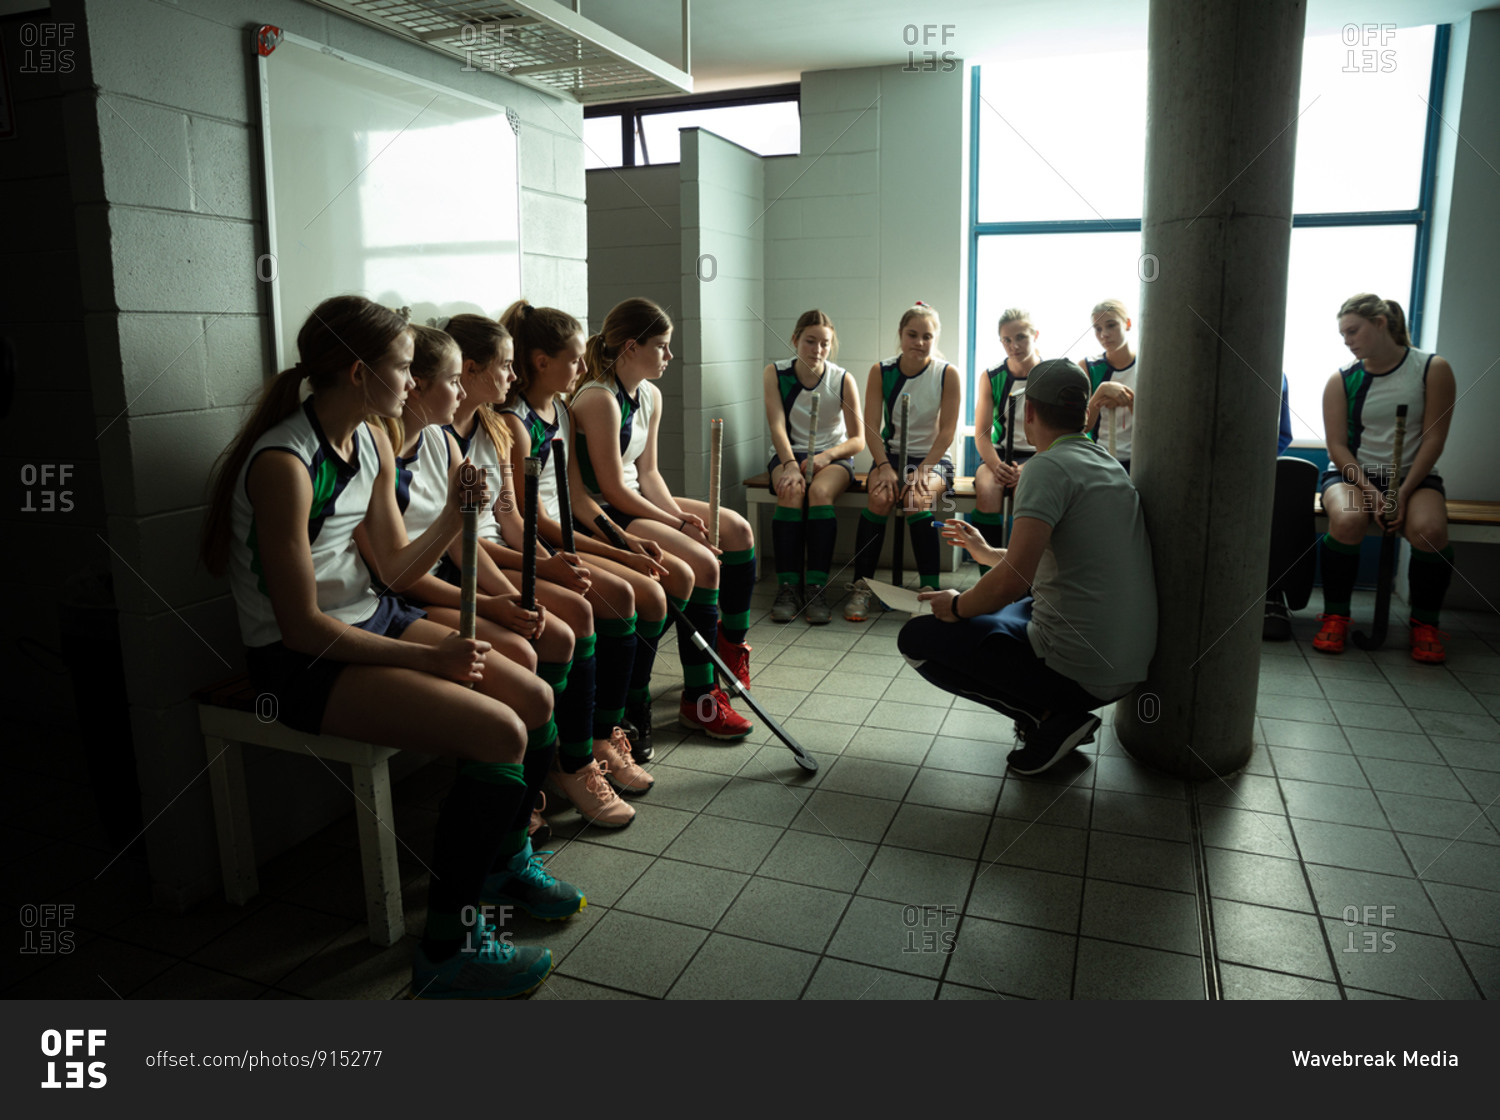 Side view of a Caucasian male field hockey coach interacting with a group of female Caucasian field hockey players, sitting in a changing room, showing them a game plan